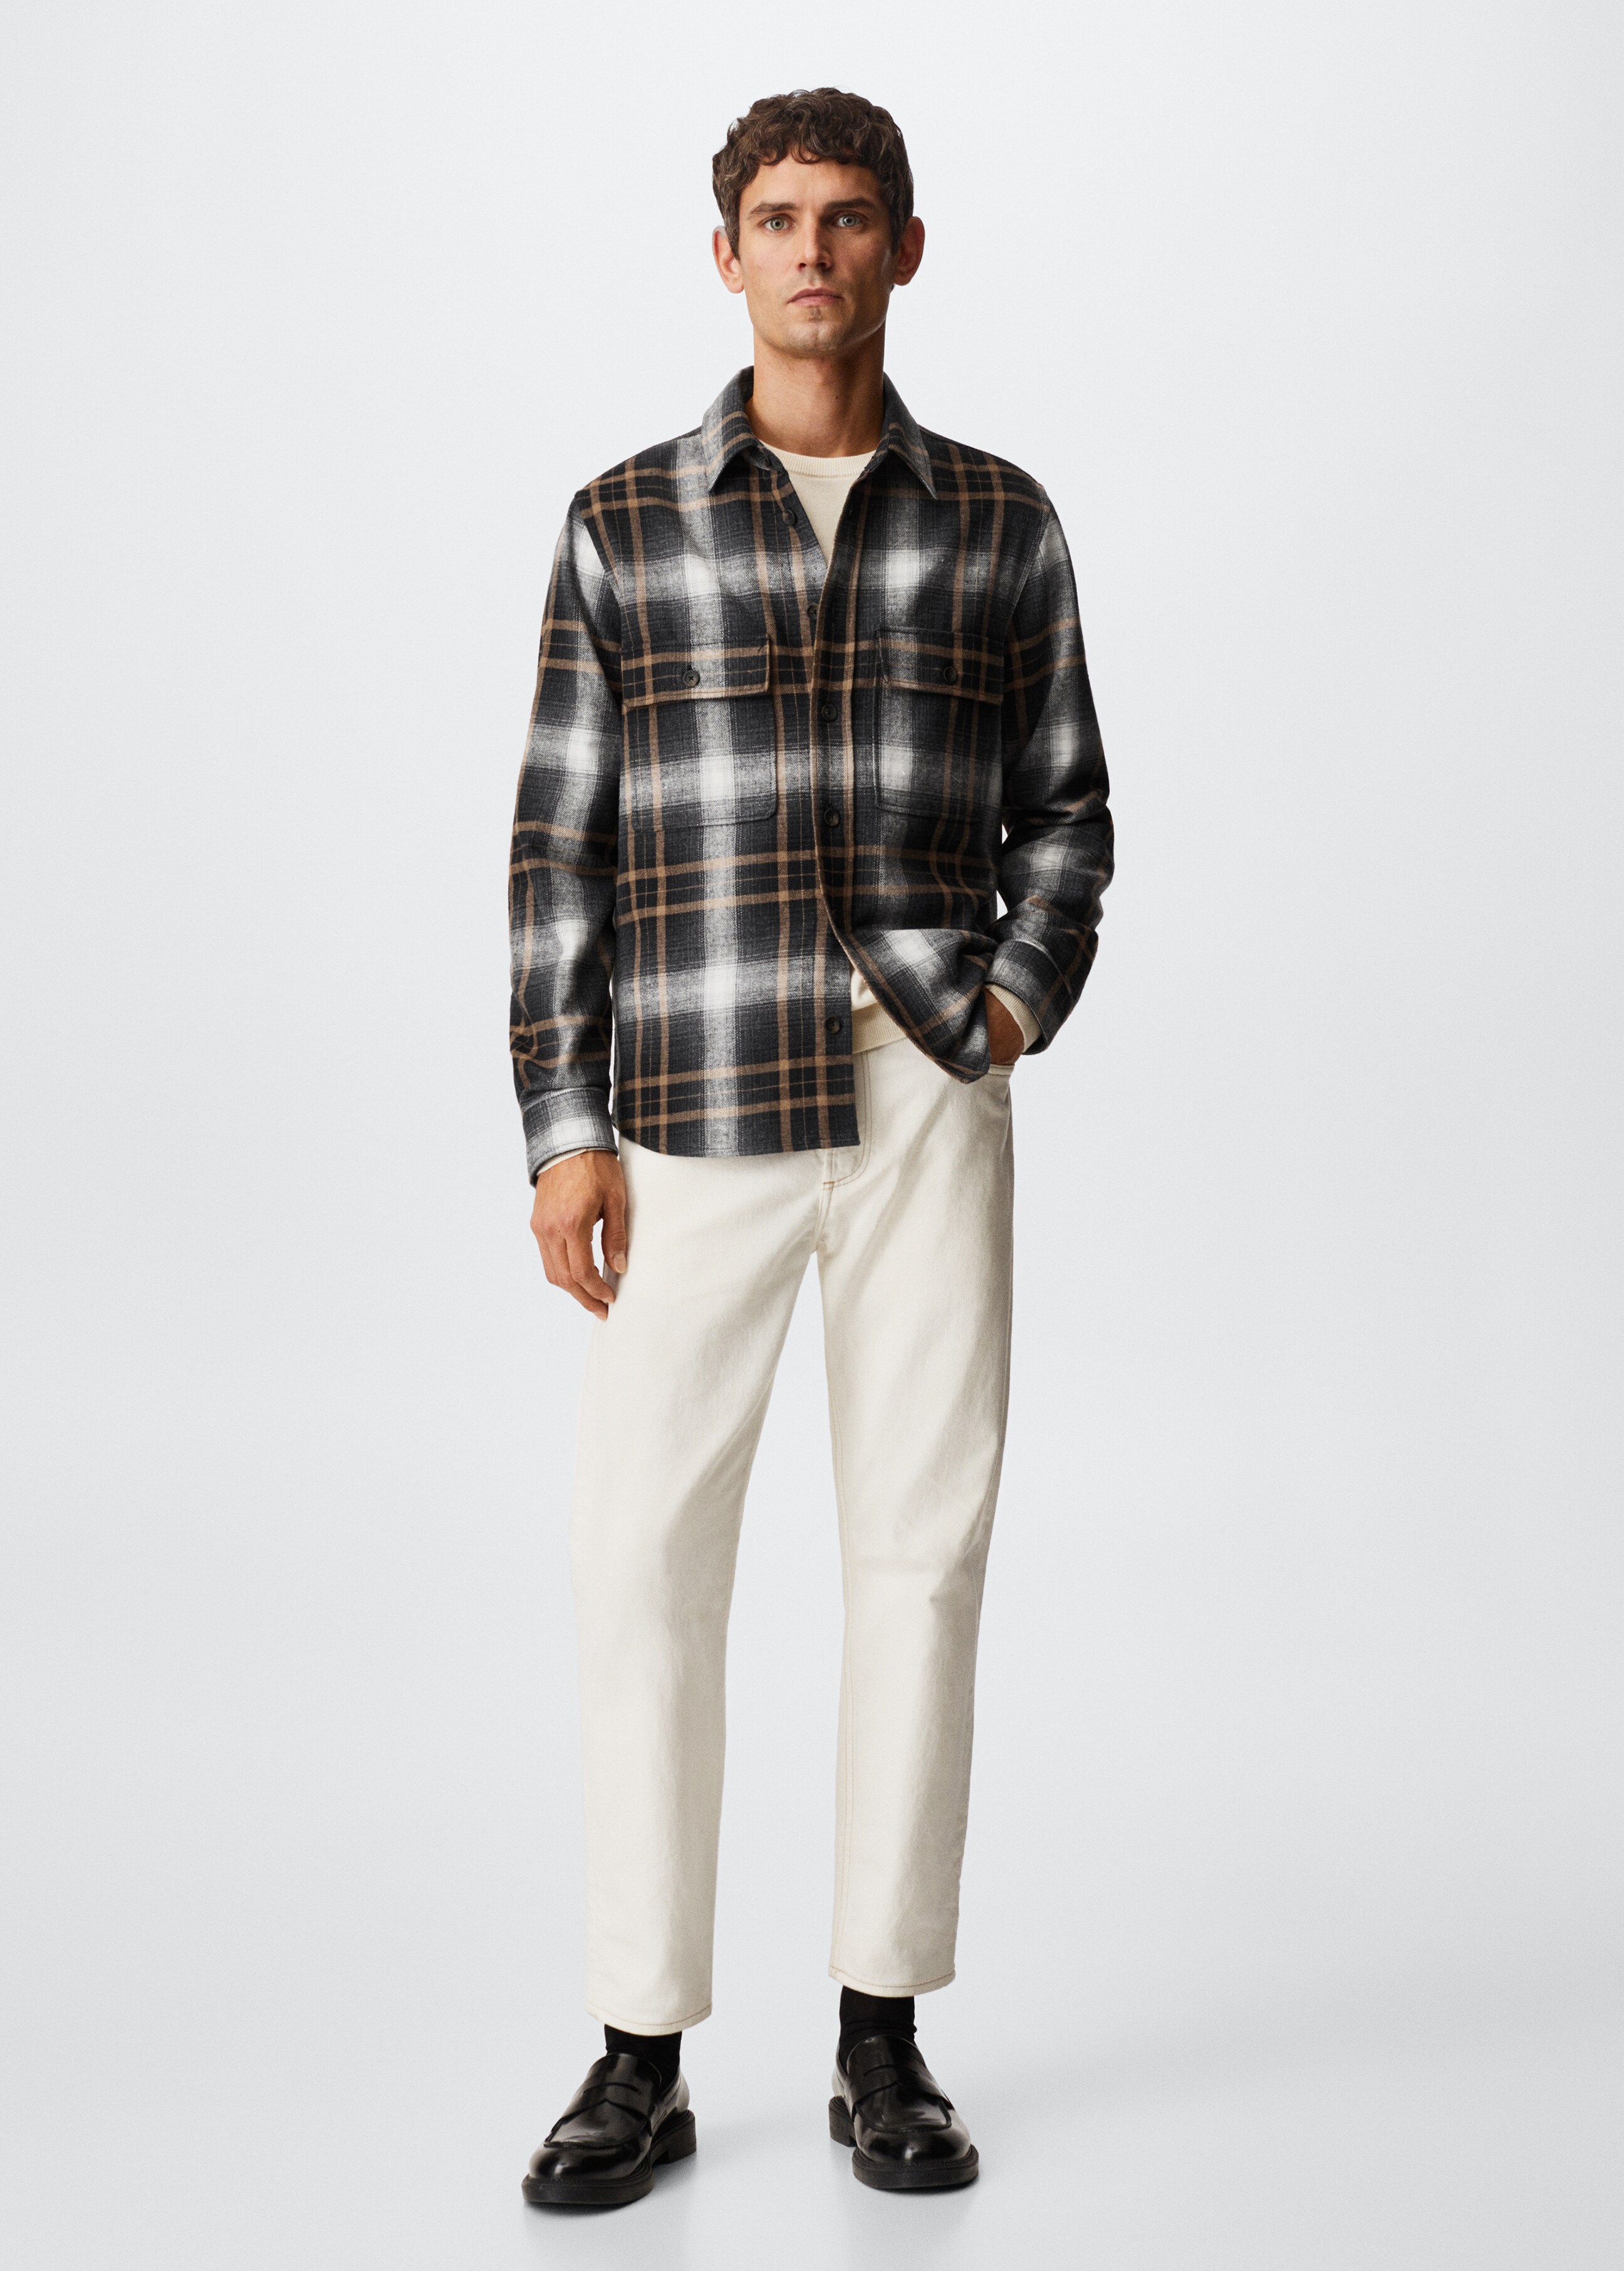 Checked flannel shirt - General plane